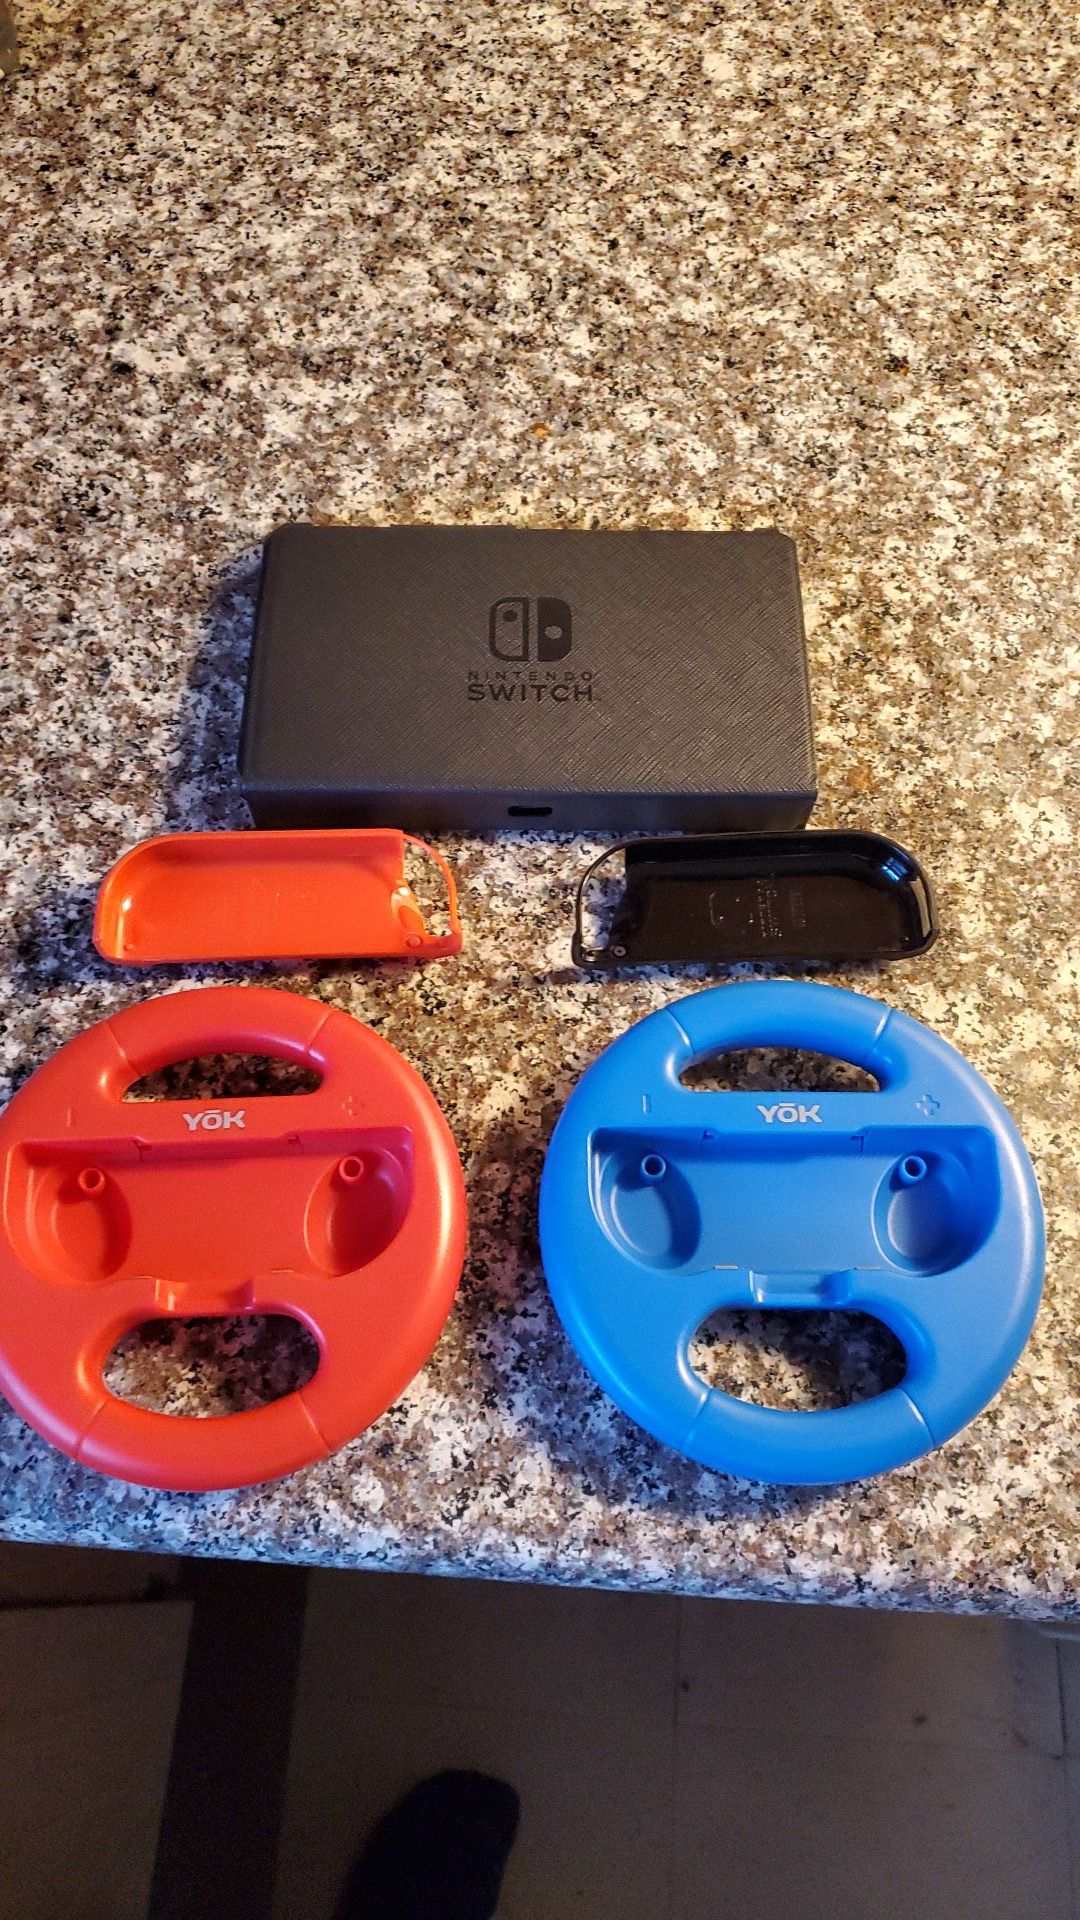 Nintendo switch case and accessories.